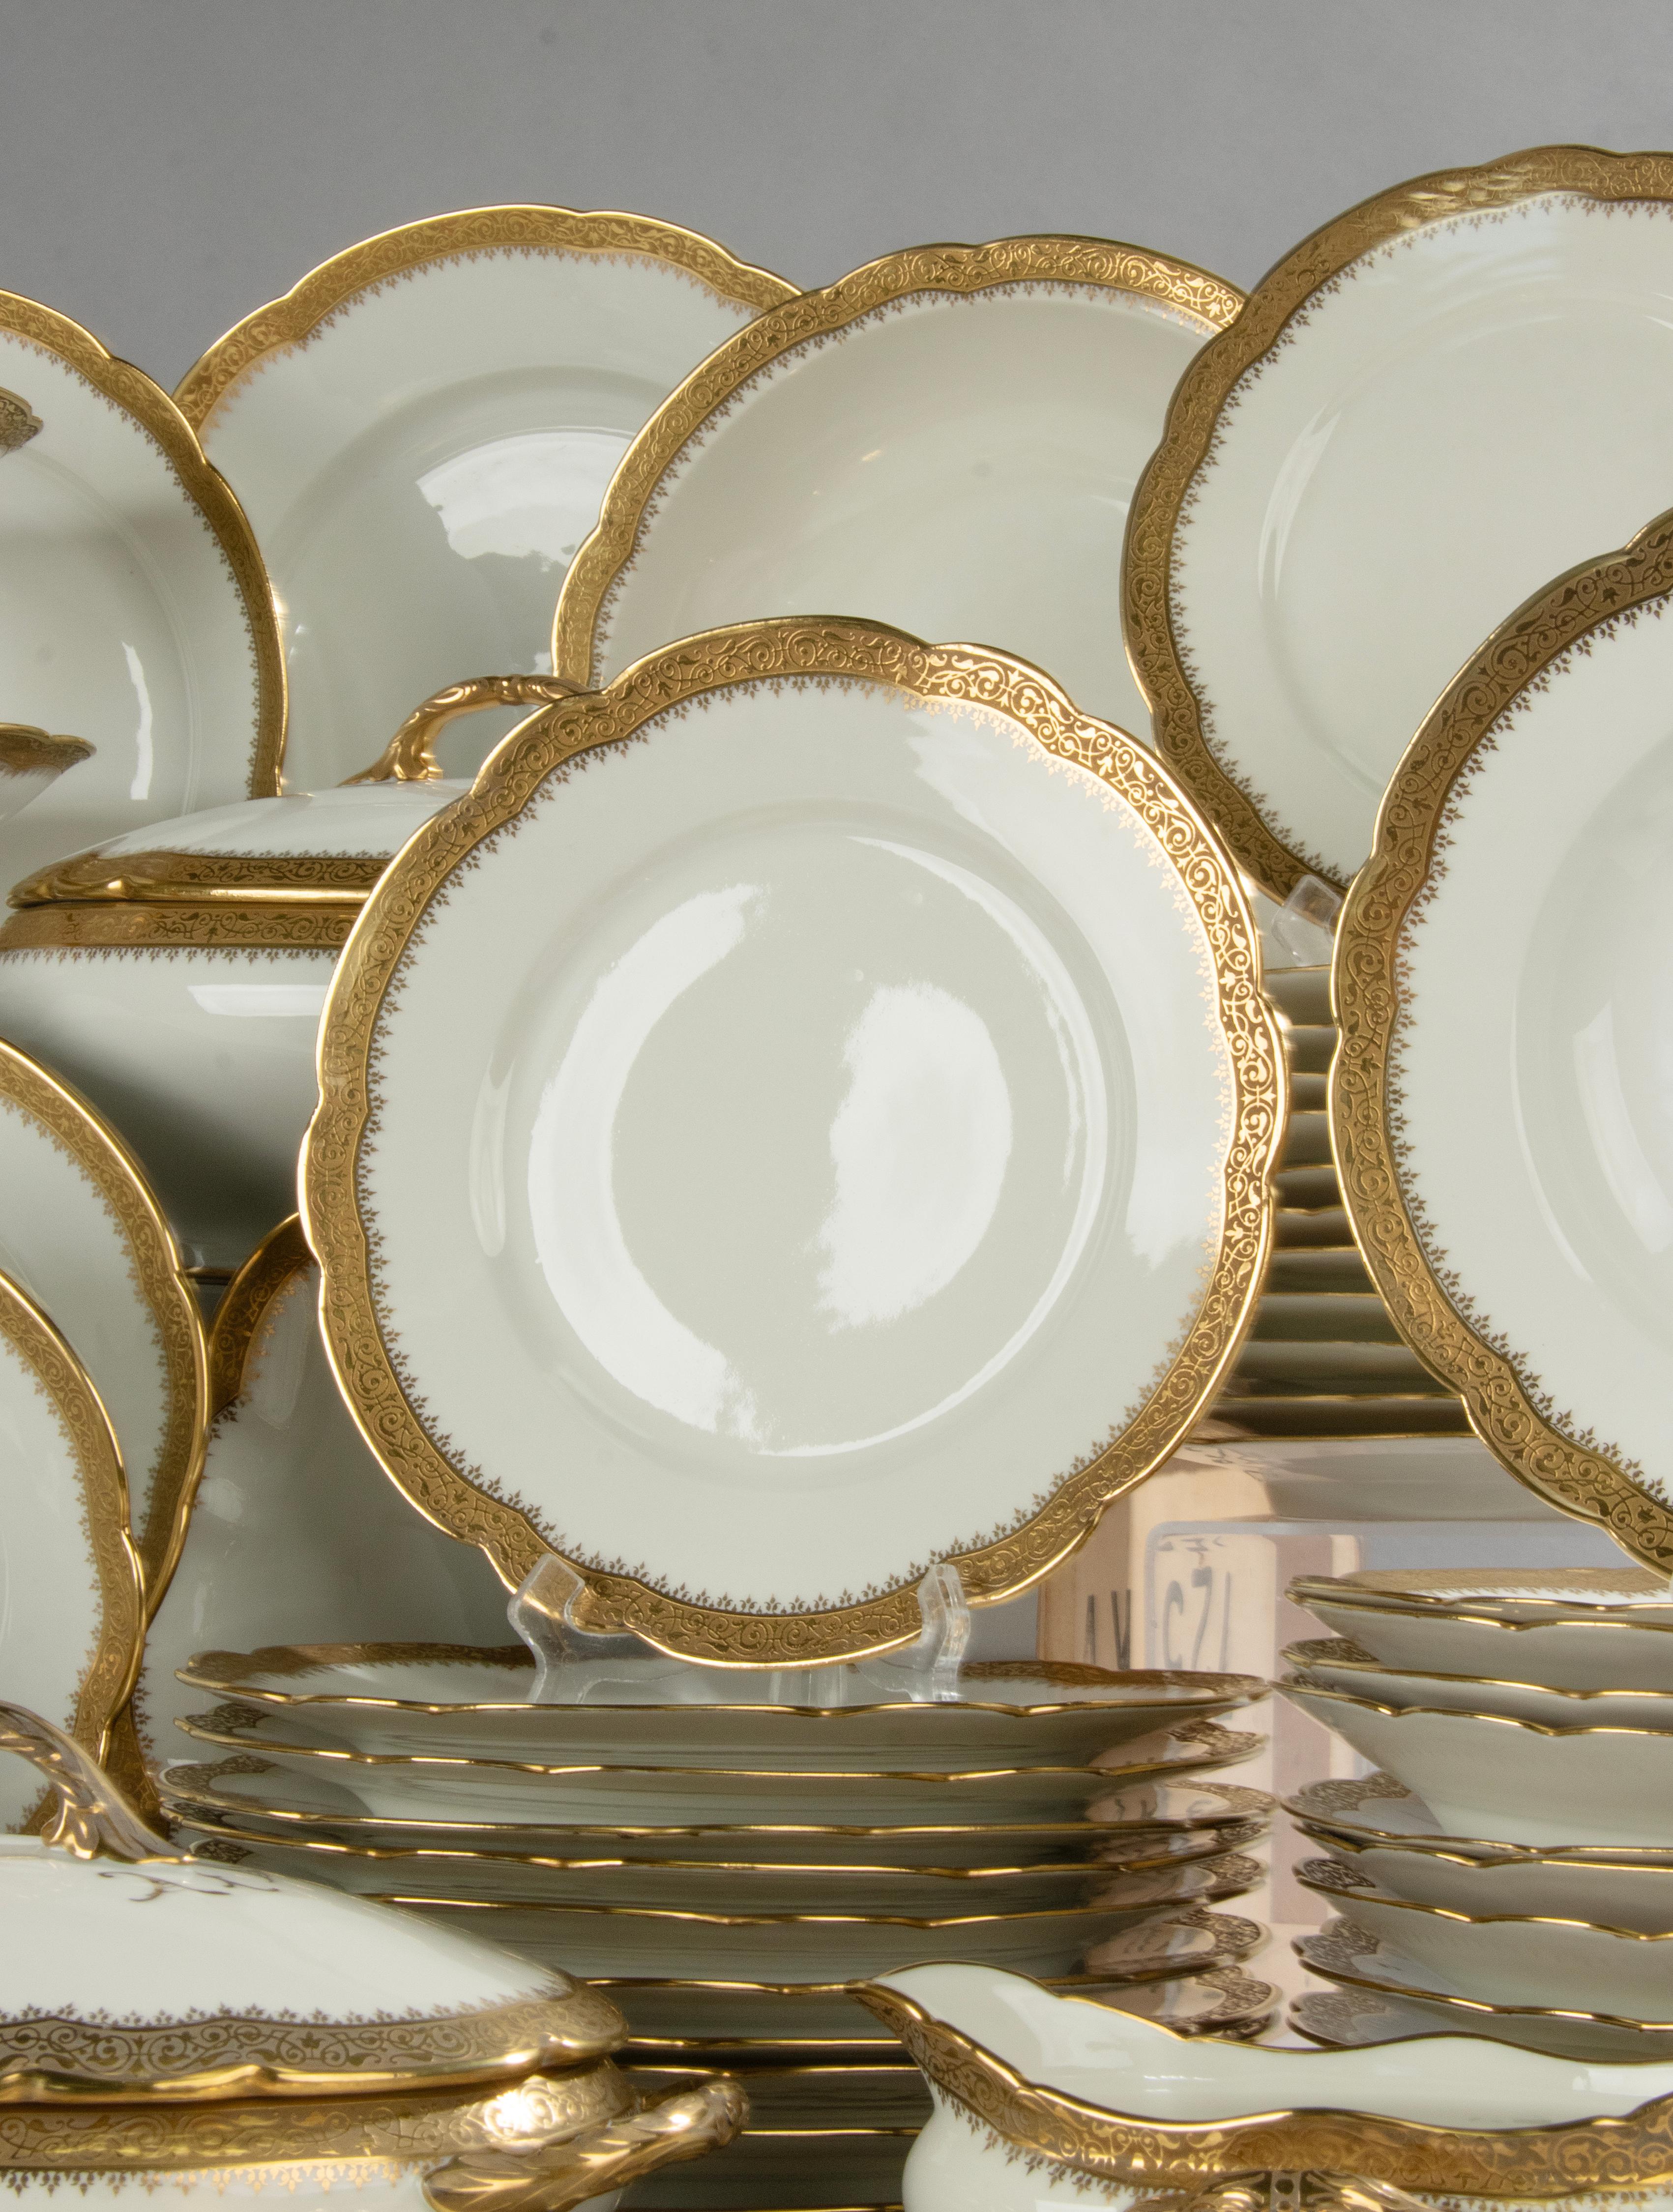 French 51-Piece Set Porcelain Tableware for 12 Persons - Limoges Incrusted Gold Trims